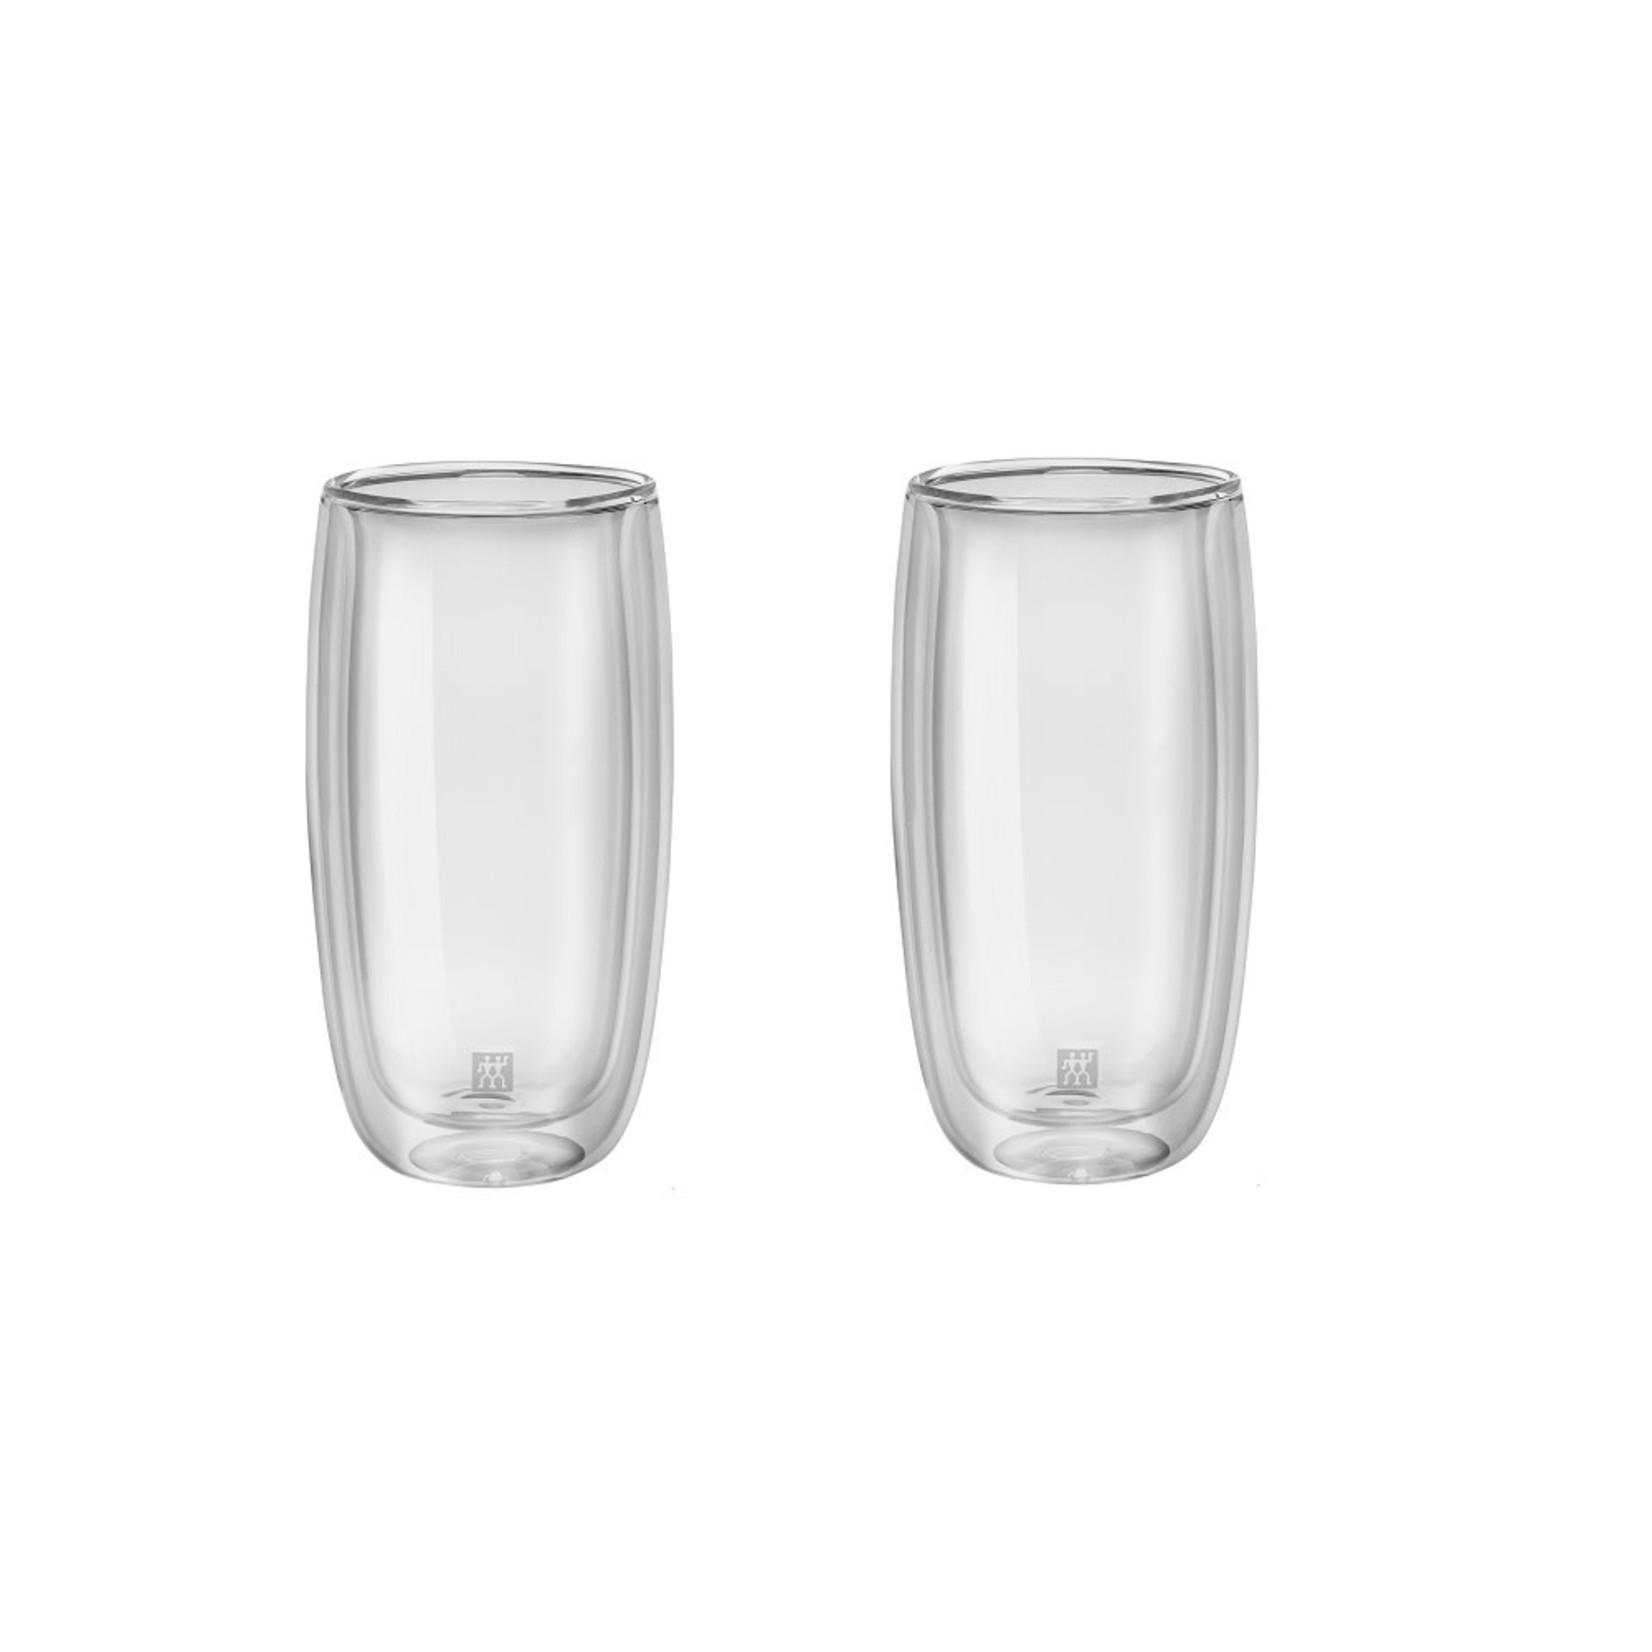 Zwilling J.A. Henckels Zwilling 2 pc Dbl Wall Beverage Glass Set - 474 ml